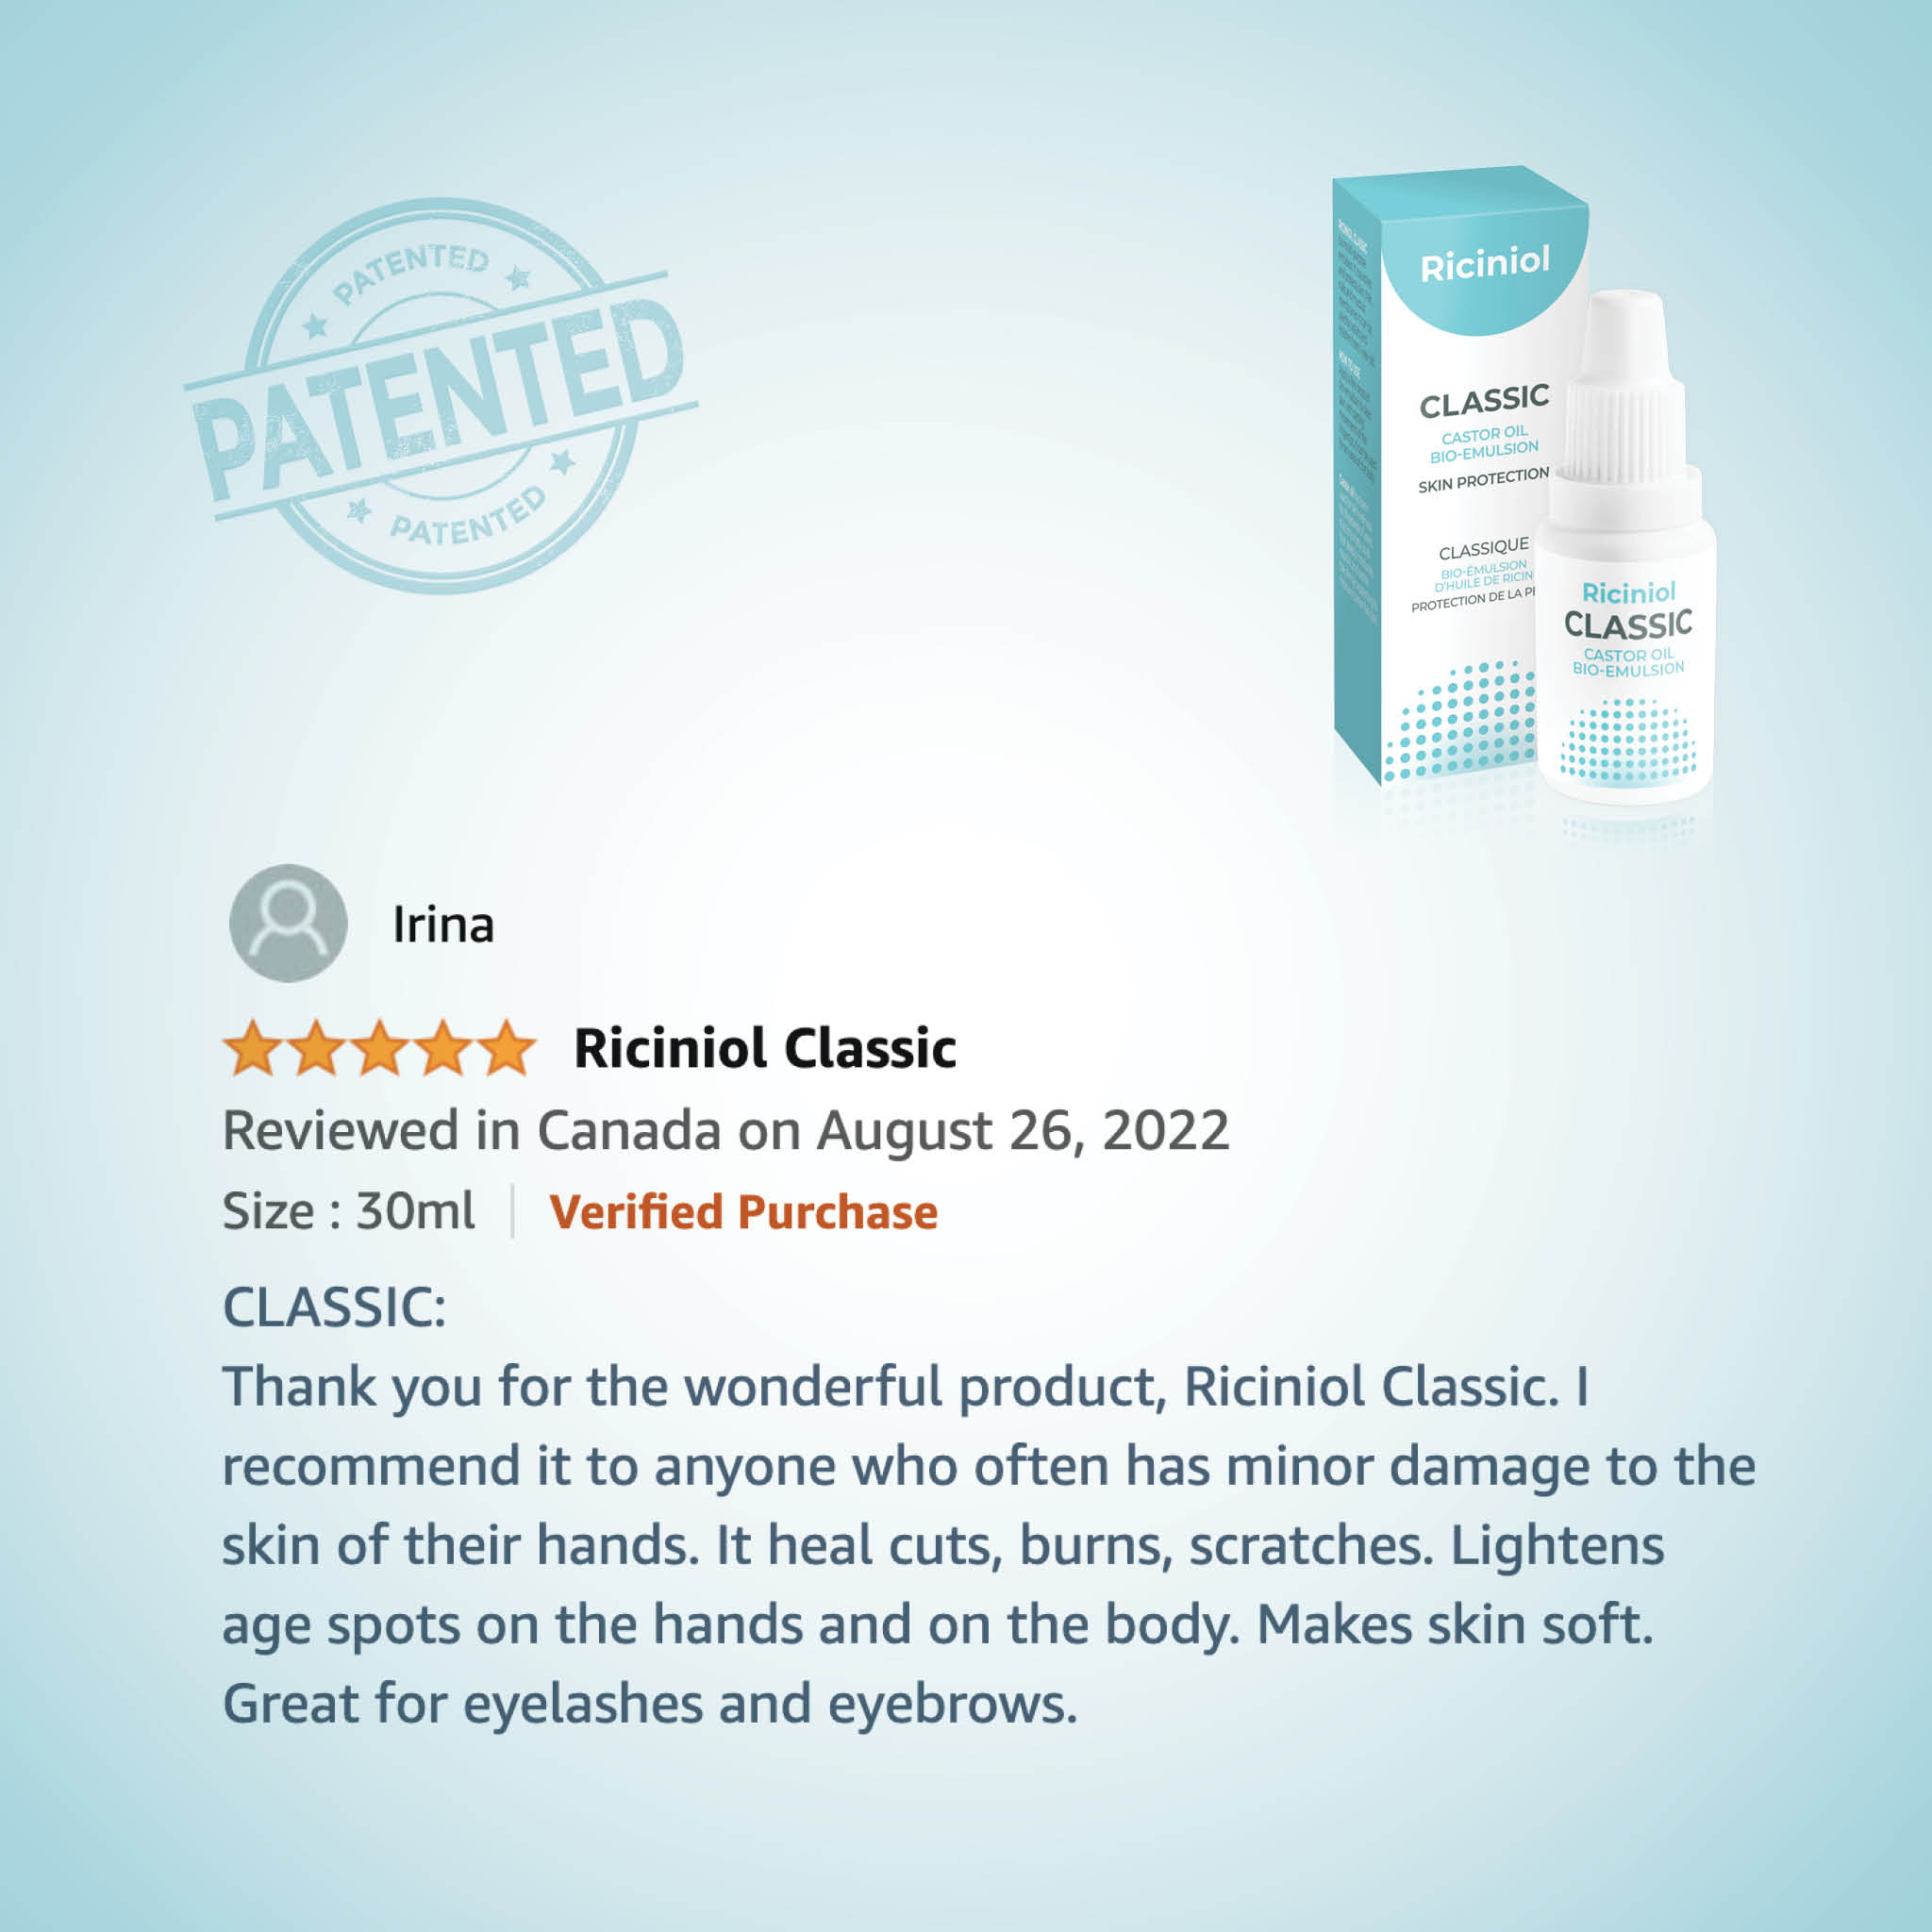 Riciniol Classic CLASSIC: Thank you for the wonderful product, Riciniol Classic. I recommend it to anyone who often has minor damage to the skin of their hands. It heal cuts, burns, scratches. Lightens age spots on the hands and on the body. Makes skin soft. Great for eyelashes and eyebrows.